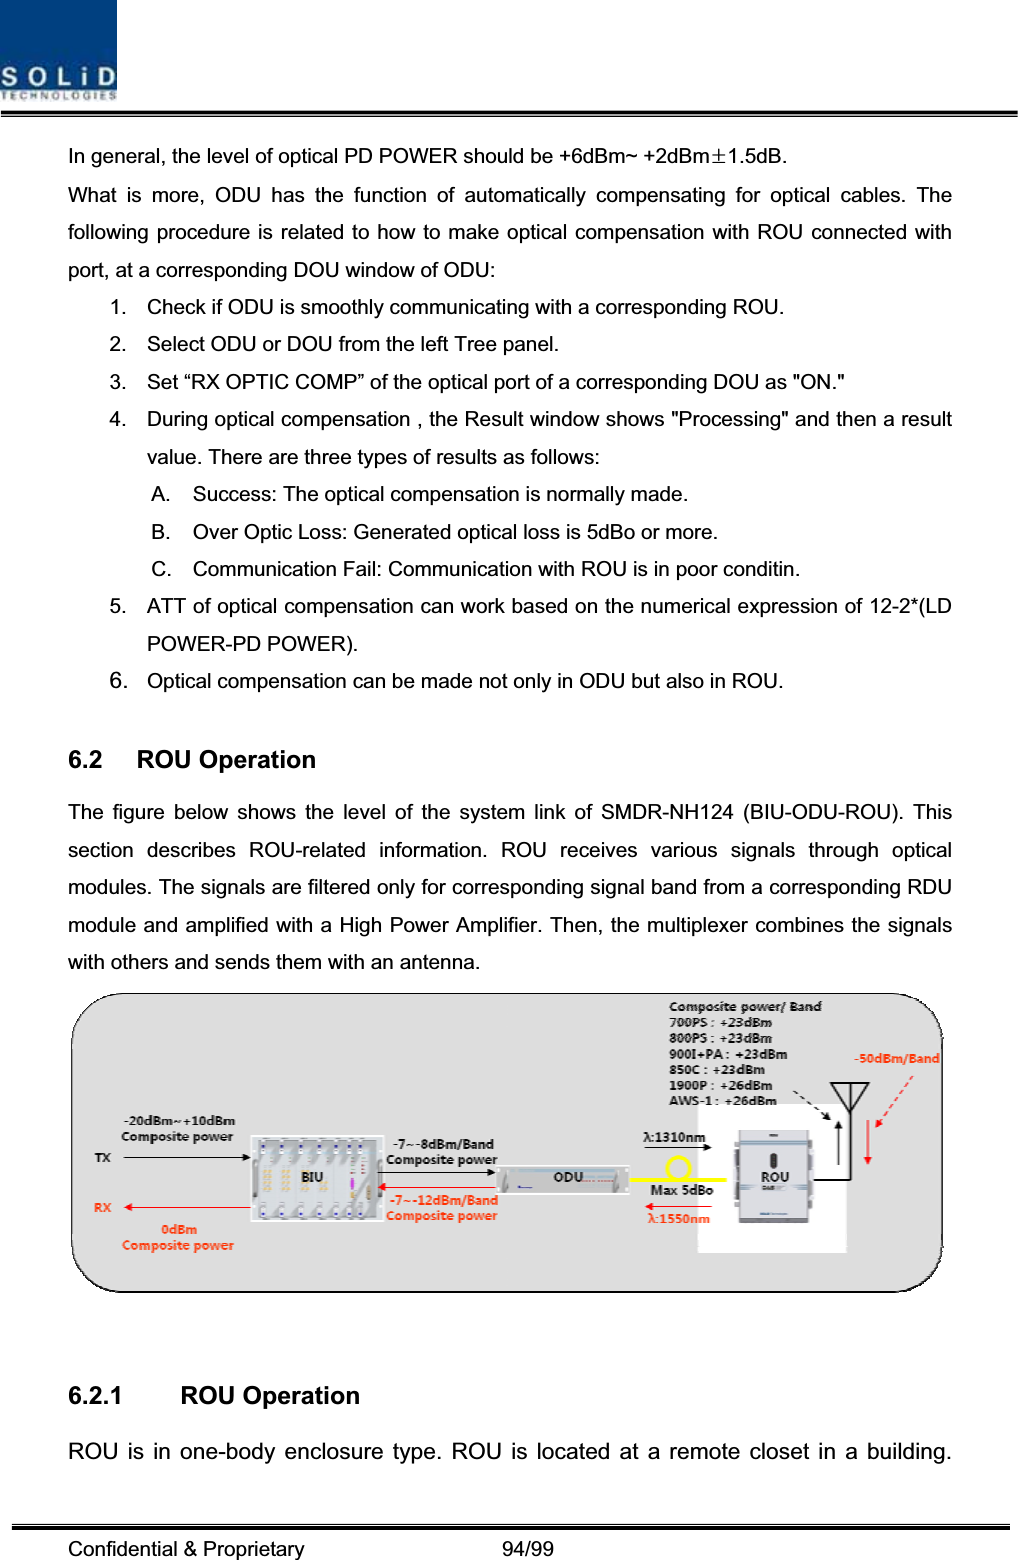 Confidential &amp; Proprietary                   94/99 In general, the level of optical PD POWER should be +6dBm~ +2dBm·1.5dB.What is more, ODU has the function of automatically compensating for optical cables. The following procedure is related to how to make optical compensation with ROU connected with port, at a corresponding DOU window of ODU: 1.  Check if ODU is smoothly communicating with a corresponding ROU. 2.  Select ODU or DOU from the left Tree panel. 3.  Set “RX OPTIC COMP” of the optical port of a corresponding DOU as &quot;ON.&quot; 4.  During optical compensation , the Result window shows &quot;Processing&quot; and then a result value. There are three types of results as follows: A.  Success: The optical compensation is normally made. B.  Over Optic Loss: Generated optical loss is 5dBo or more. C.  Communication Fail: Communication with ROU is in poor conditin. 5.  ATT of optical compensation can work based on the numerical expression of 12-2*(LD POWER-PD POWER). 6. Optical compensation can be made not only in ODU but also in ROU.6.2  ROU Operation The figure below shows the level of the system link of SMDR-NH124 (BIU-ODU-ROU). This section describes ROU-related information. ROU receives various signals through optical modules. The signals are filtered only for corresponding signal band from a corresponding RDU module and amplified with a High Power Amplifier. Then, the multiplexer combines the signals with others and sends them with an antenna. 6.2.1 ROU Operation ROU is in one-body enclosure type. ROU is located at a remote closet in a building. 